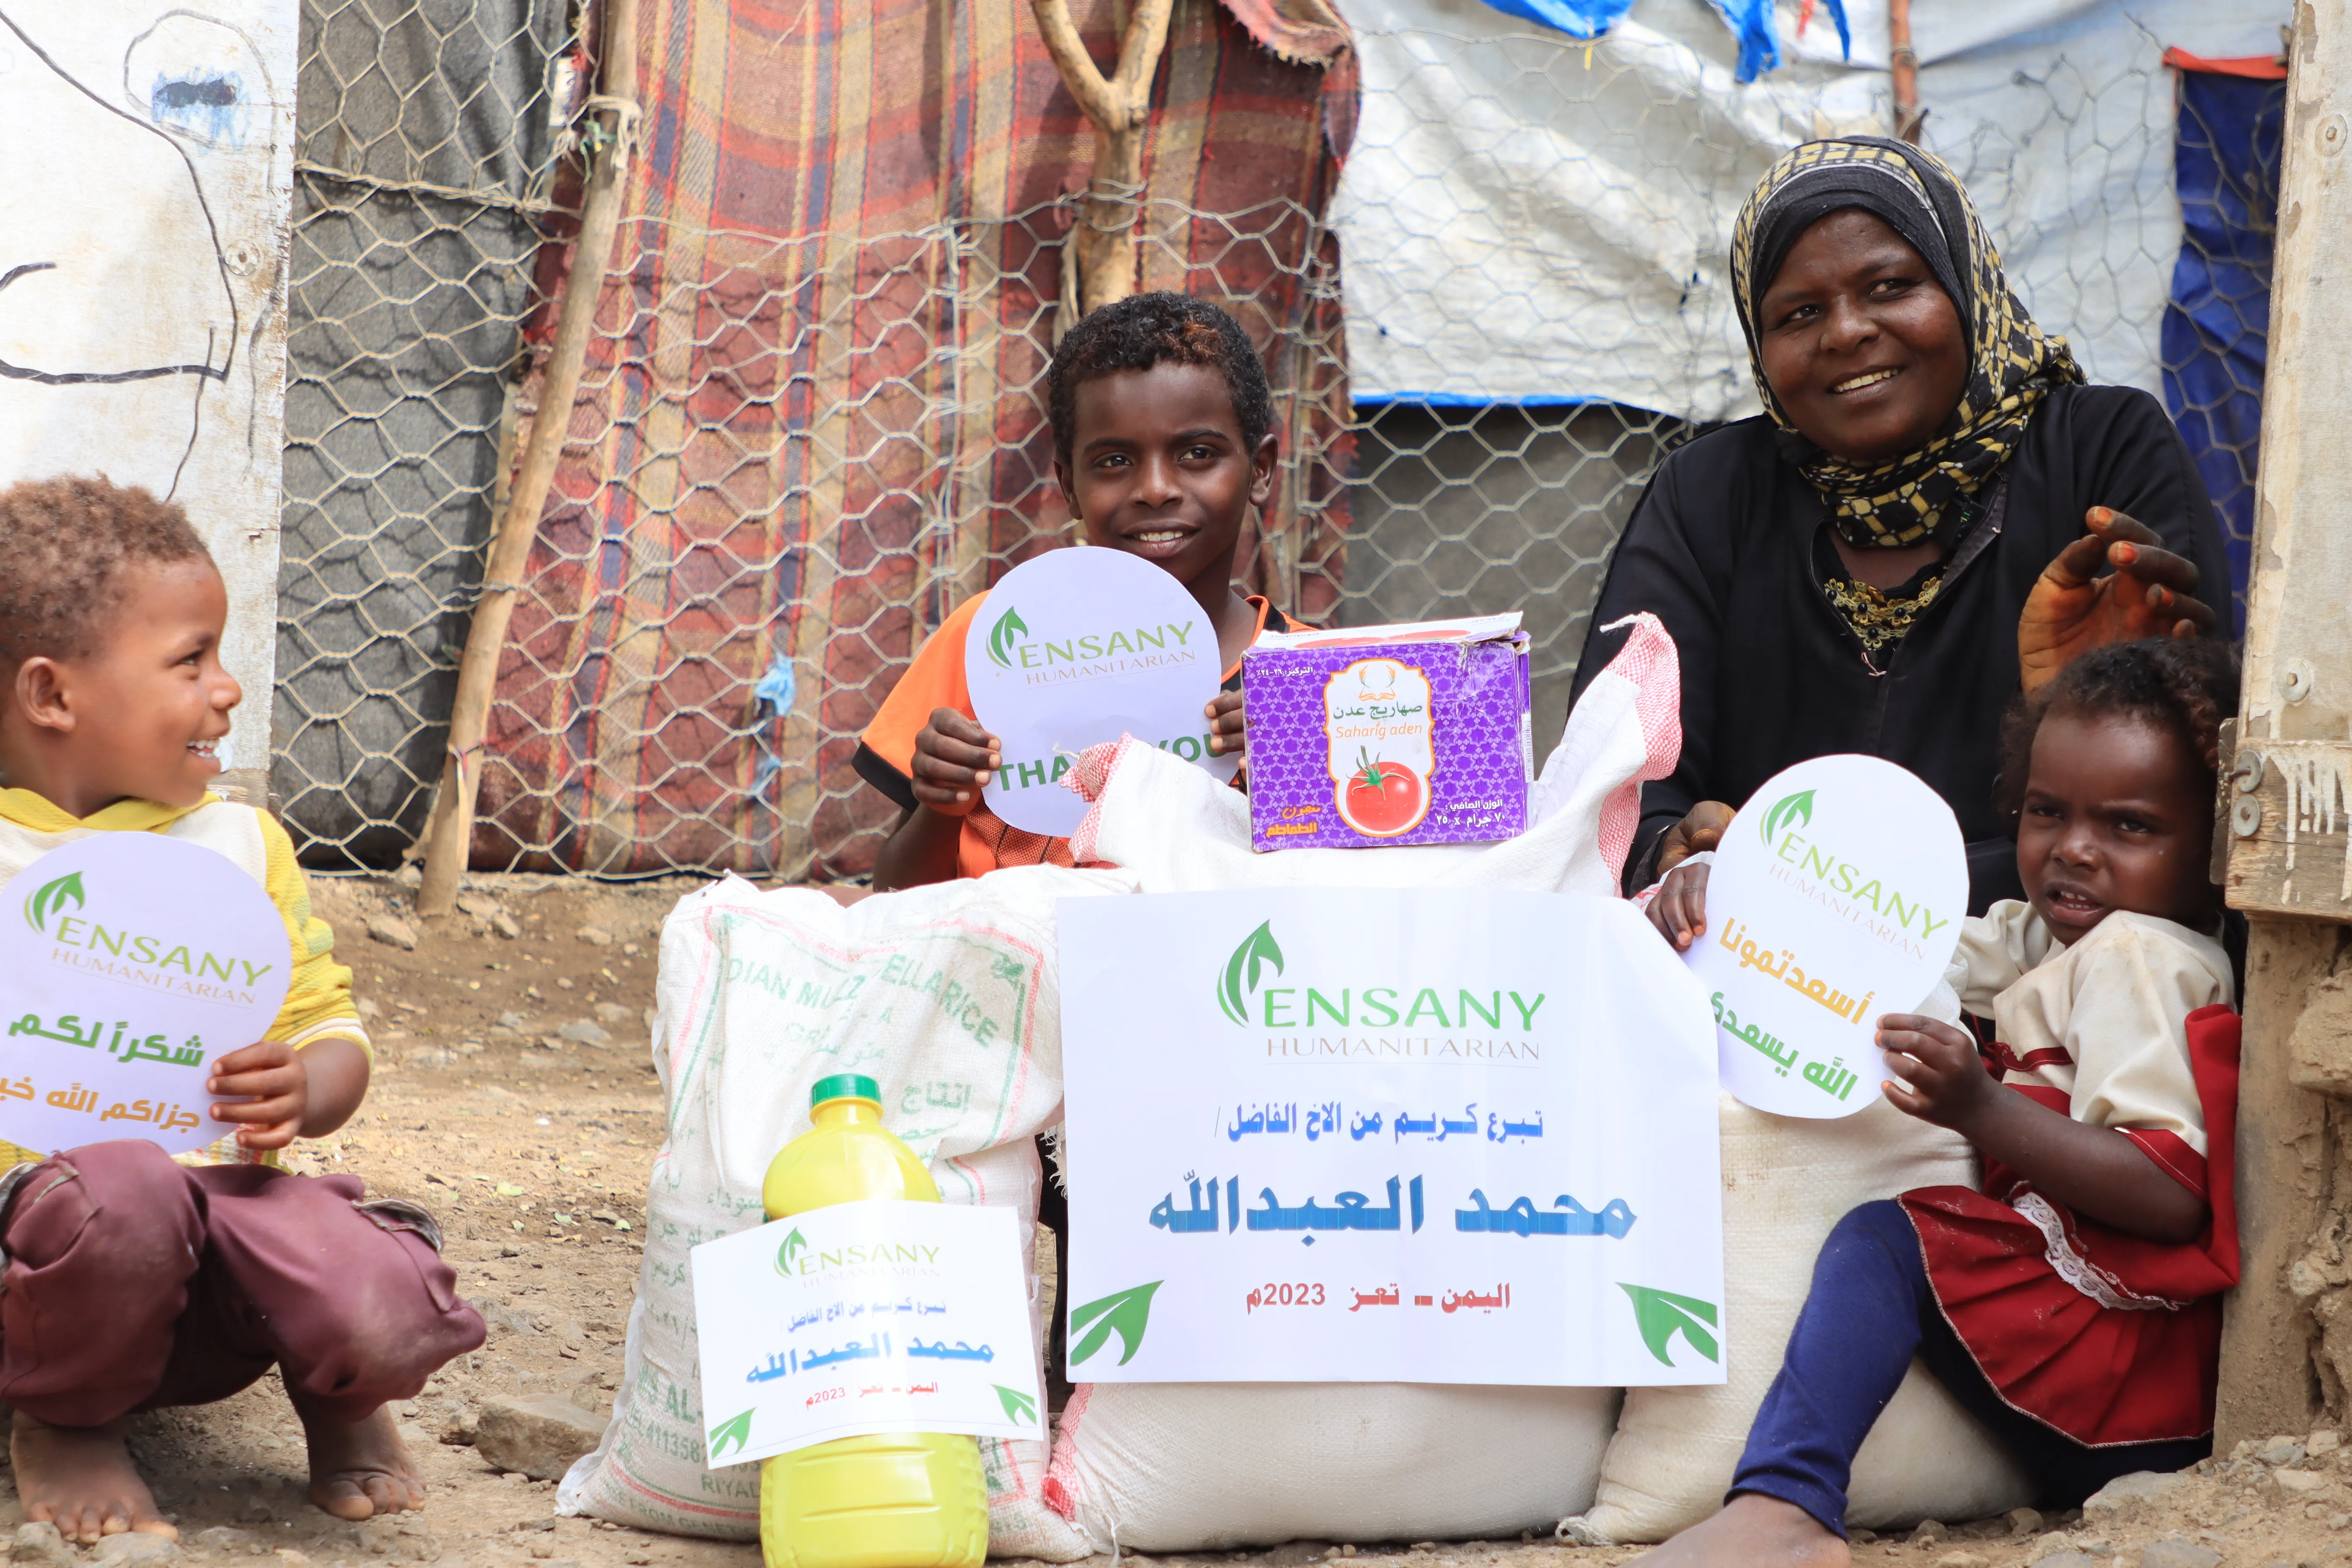 Let's Be One Hand: Providing Support to Yemeni Families in Times of Hardship